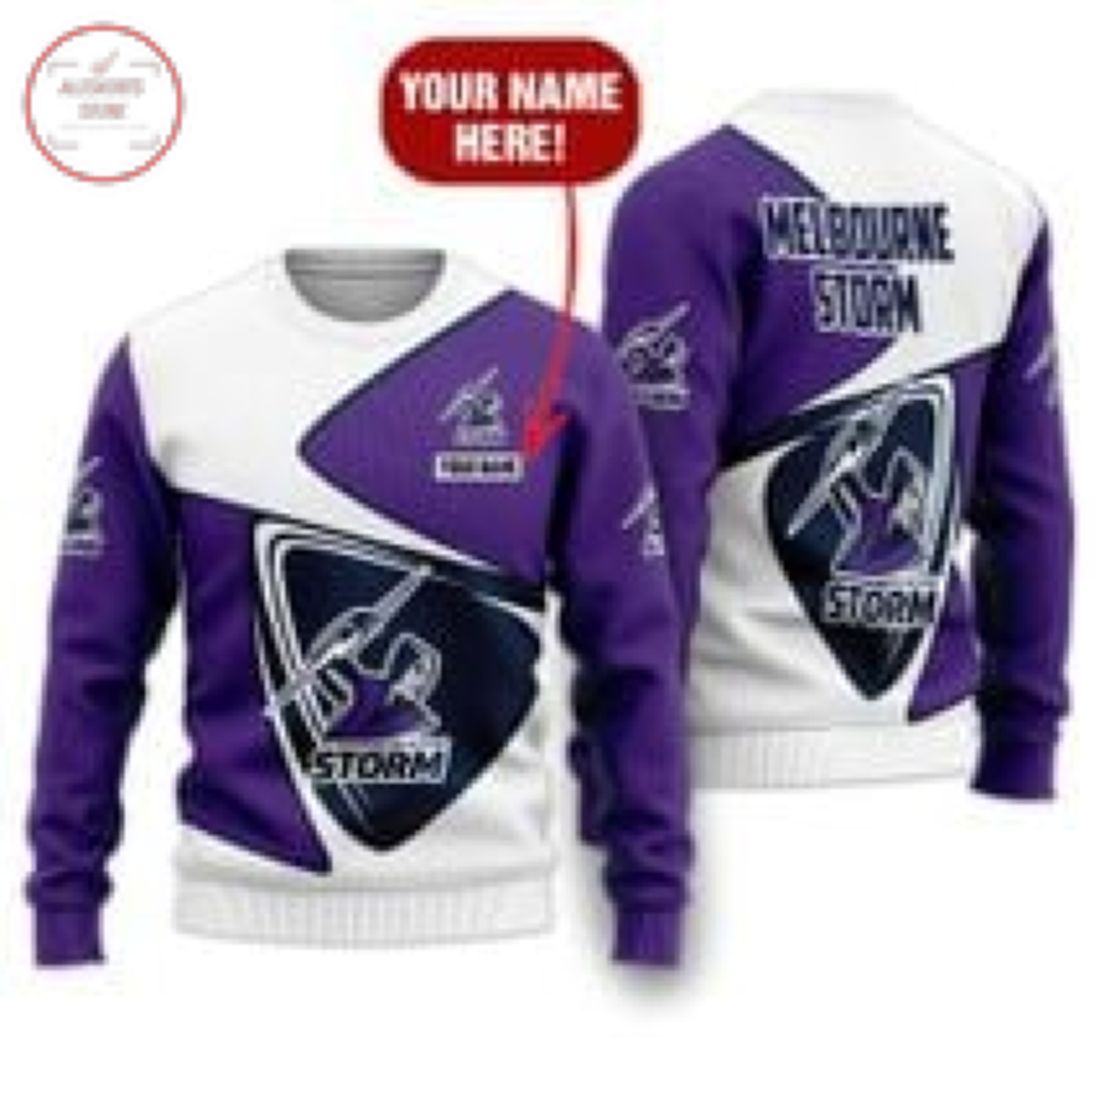 Nrl Melbourne Storm Personalized Shirts